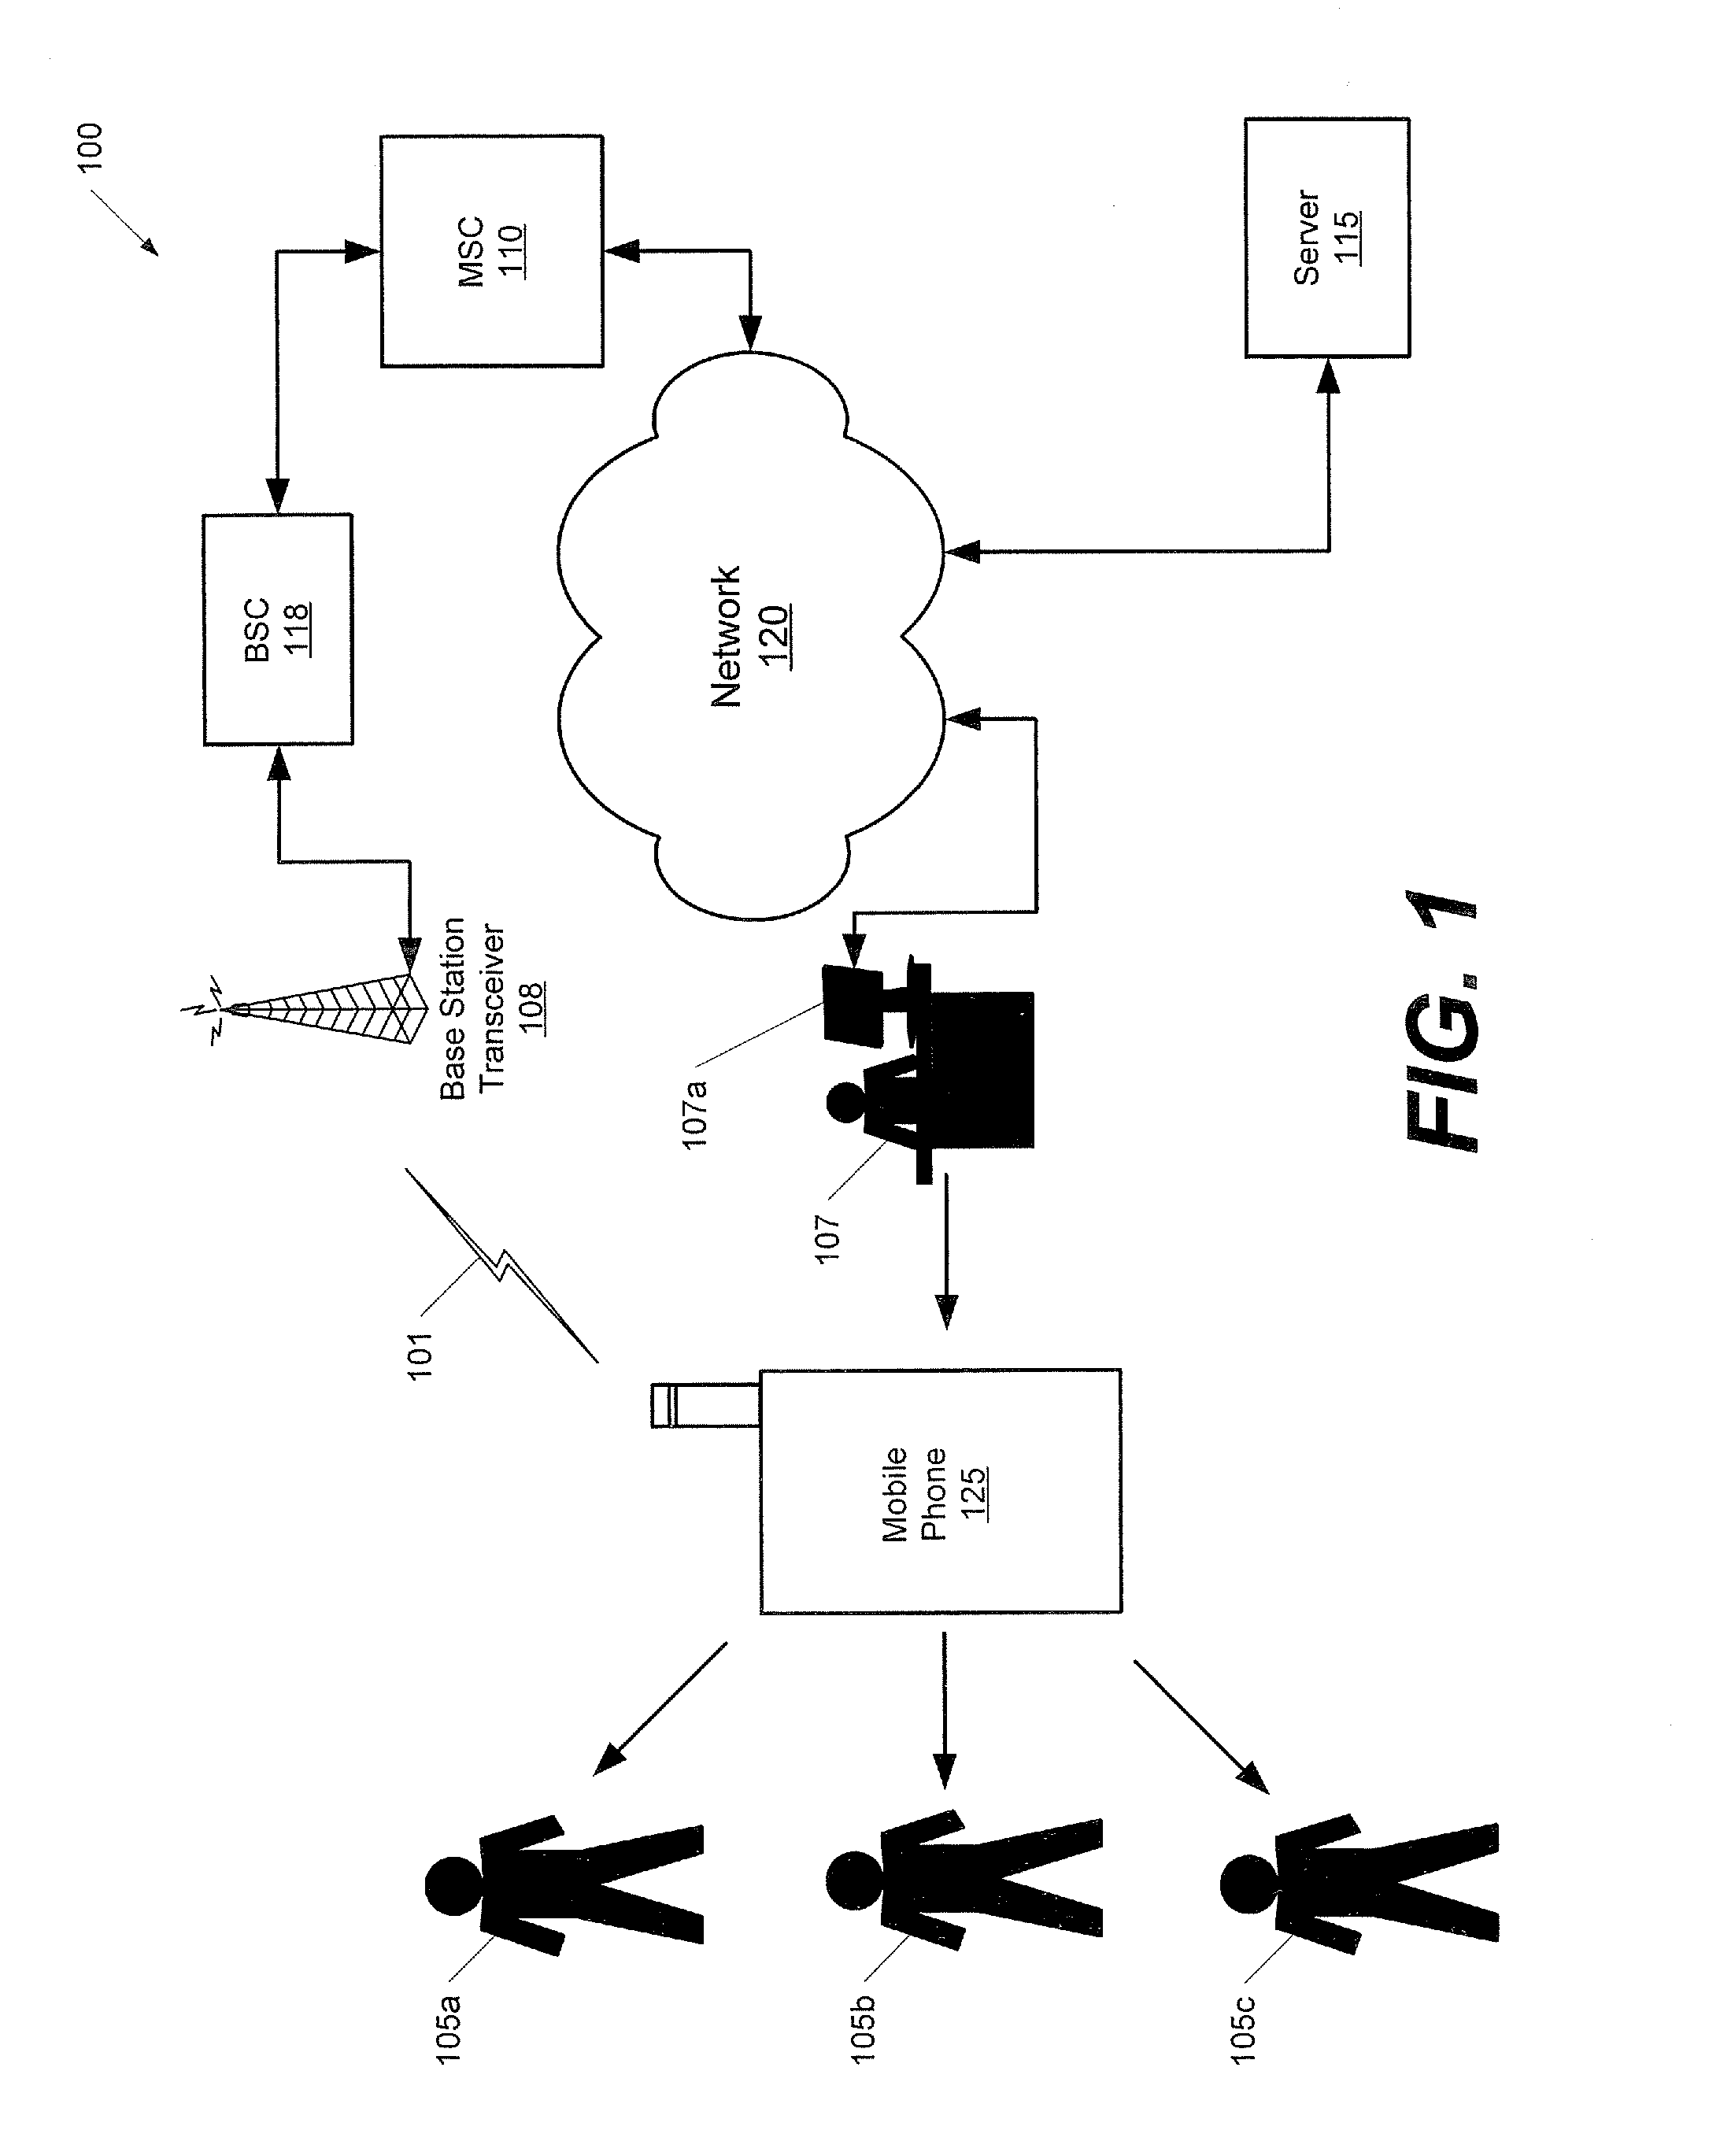 Methods, devices and computer program products for tracking usage of a network by a plurality of users of a mobile phone